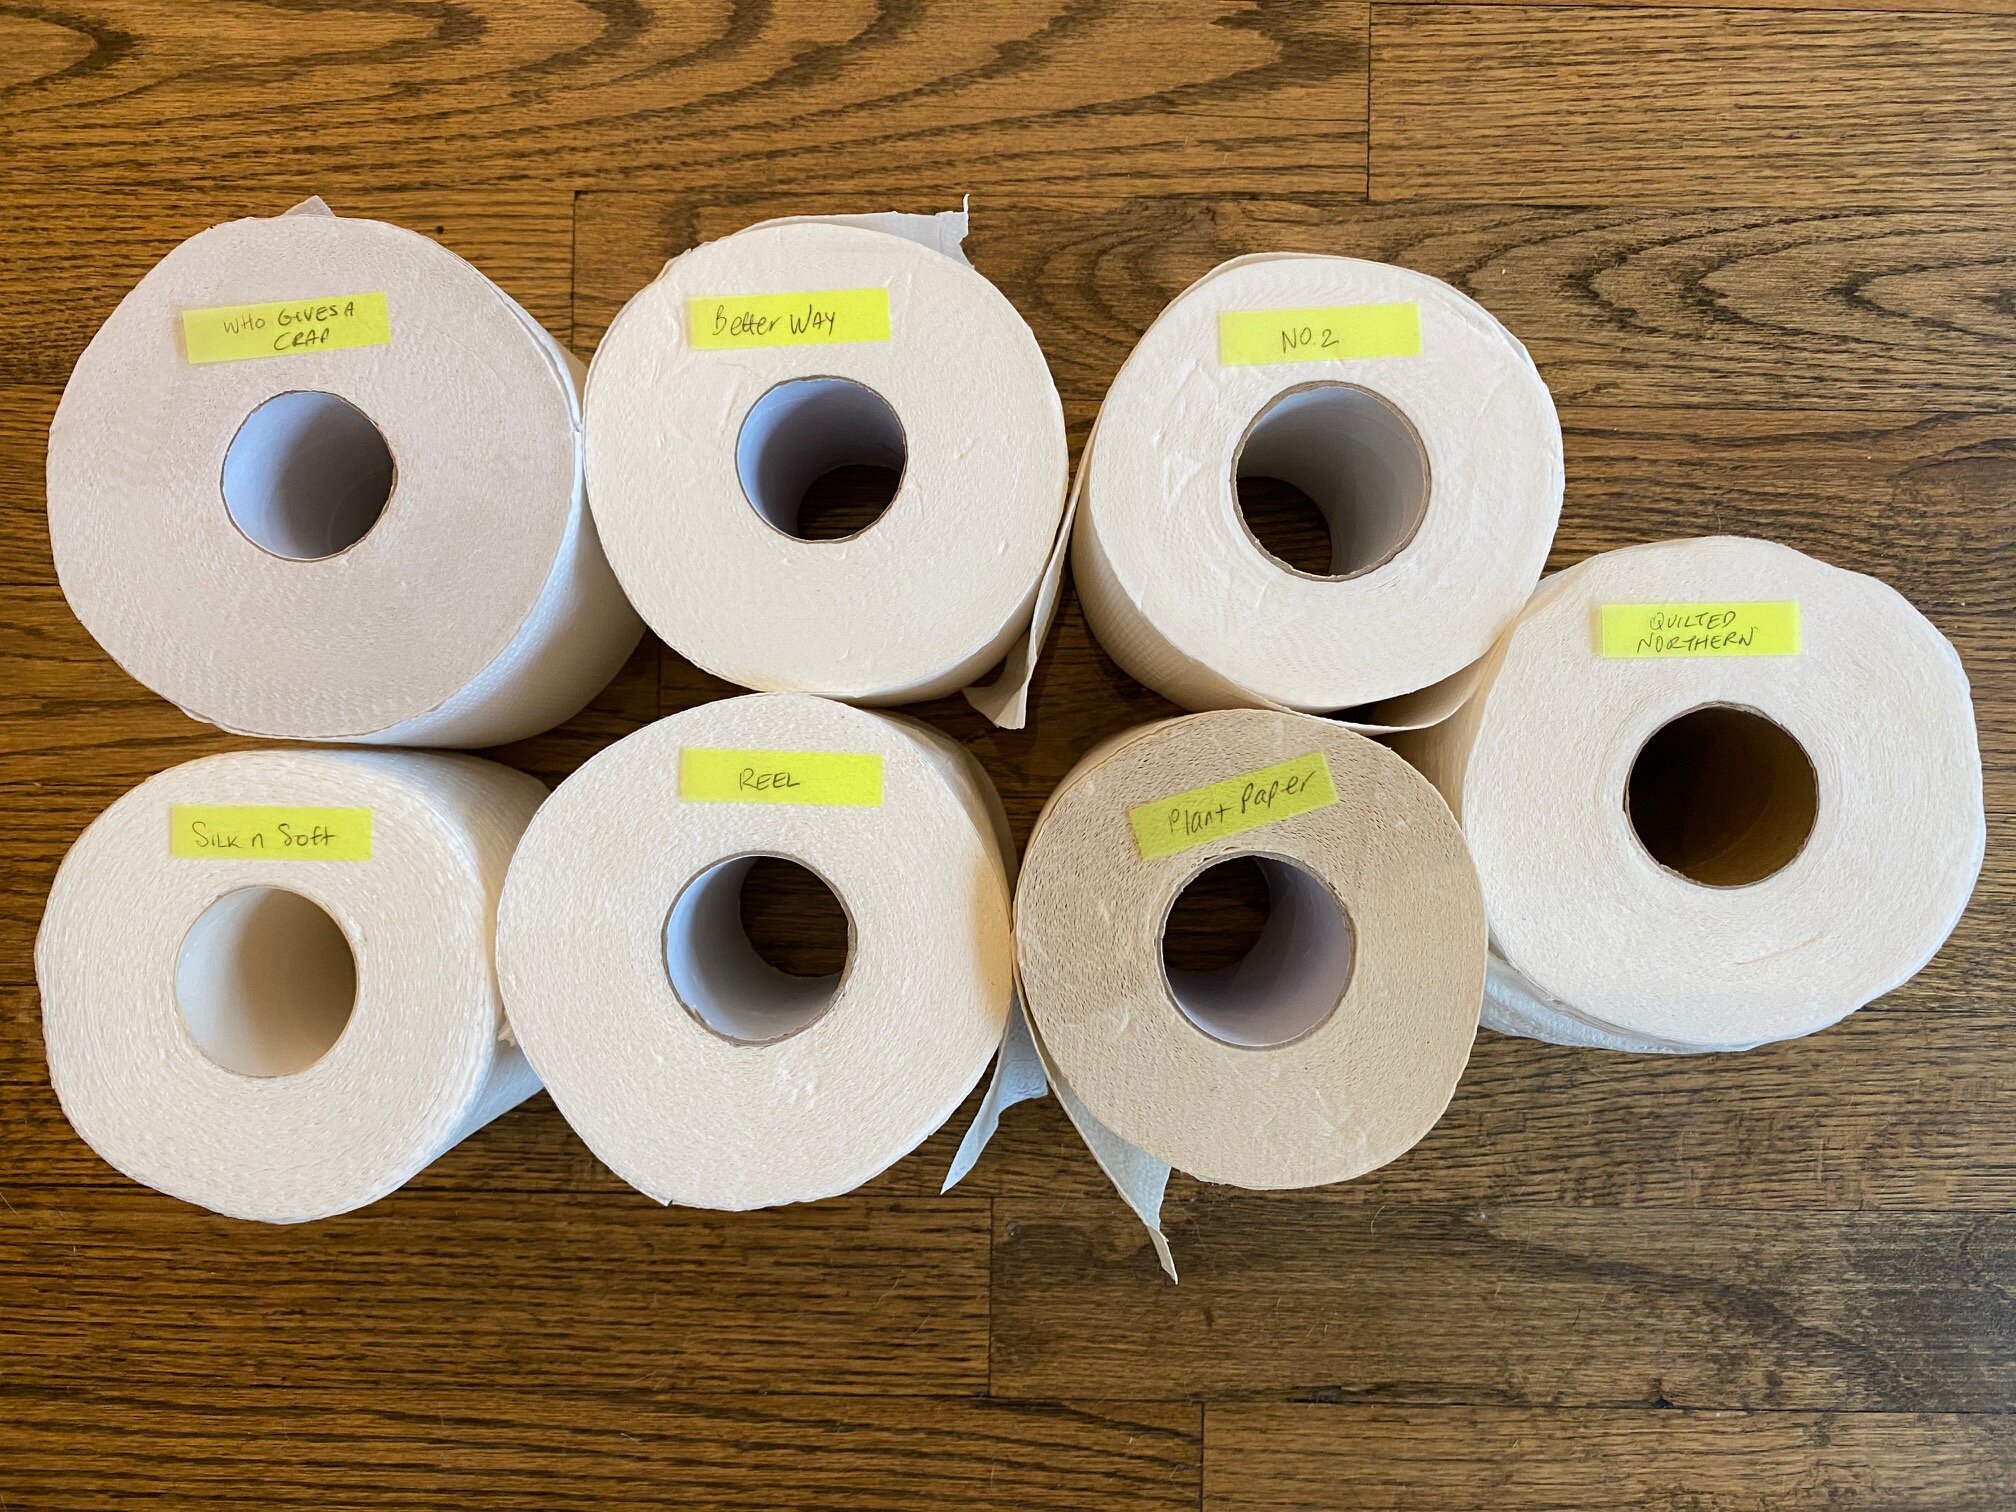 We tried 12 different bamboo toilet paper brands to tell you which